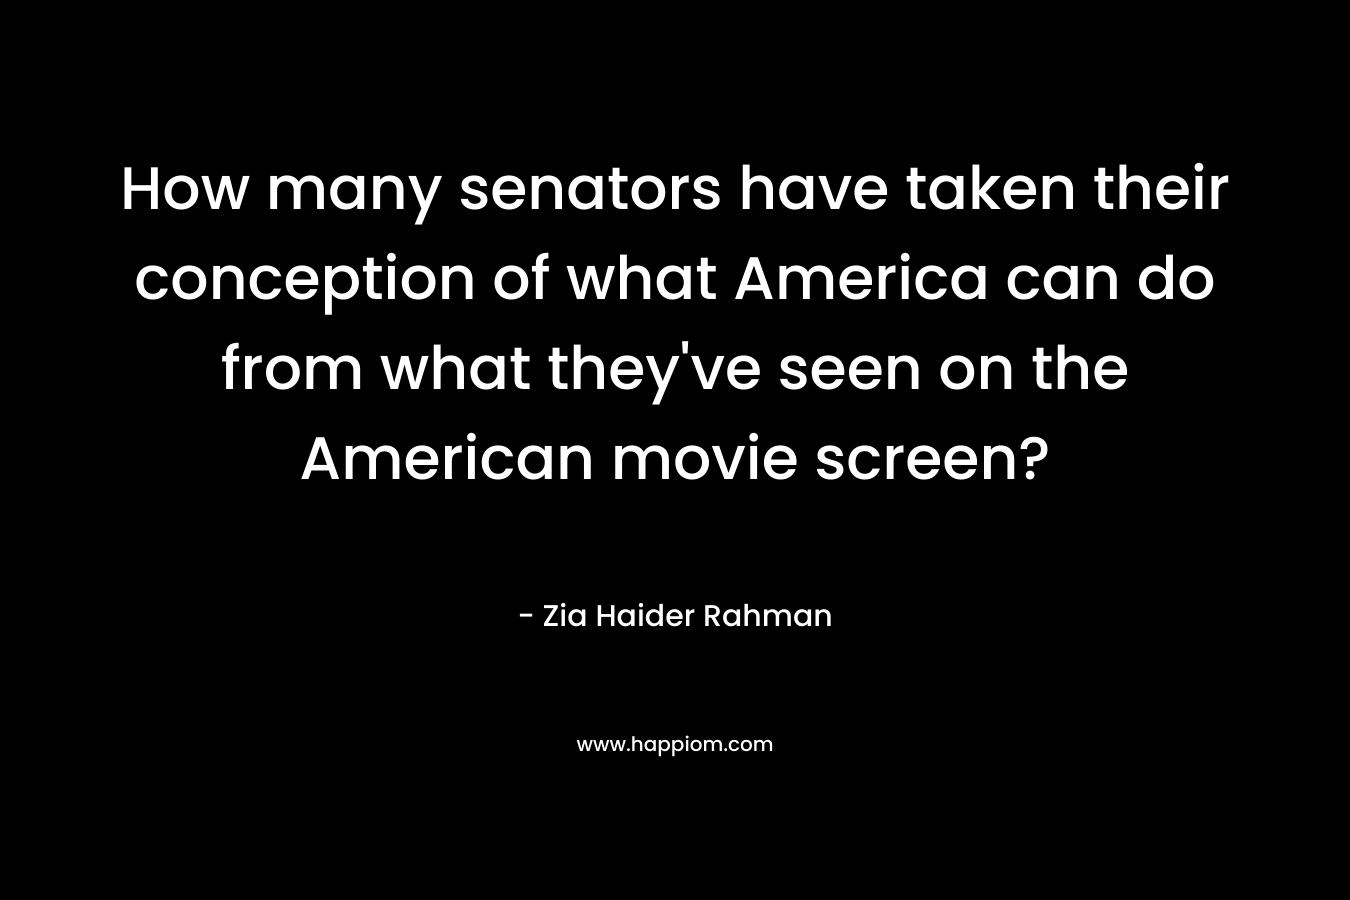 How many senators have taken their conception of what America can do from what they’ve seen on the American movie screen? – Zia Haider Rahman